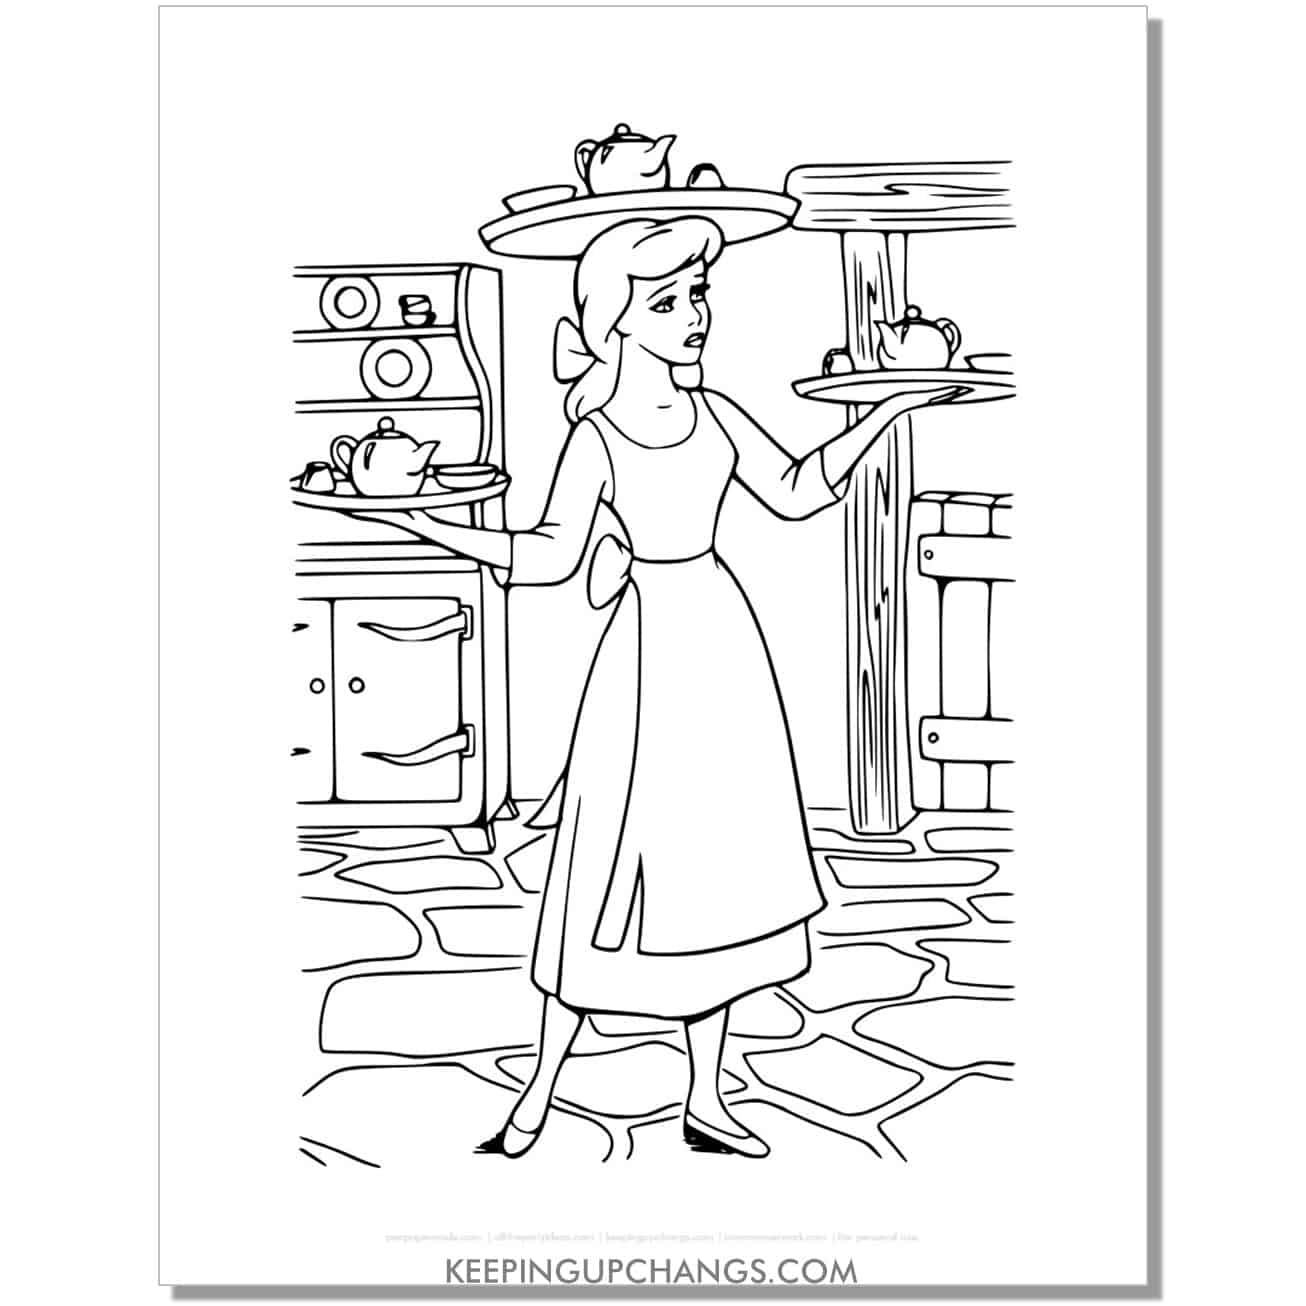 cinderella balncing tea trays on head and hands coloring page, sheet.